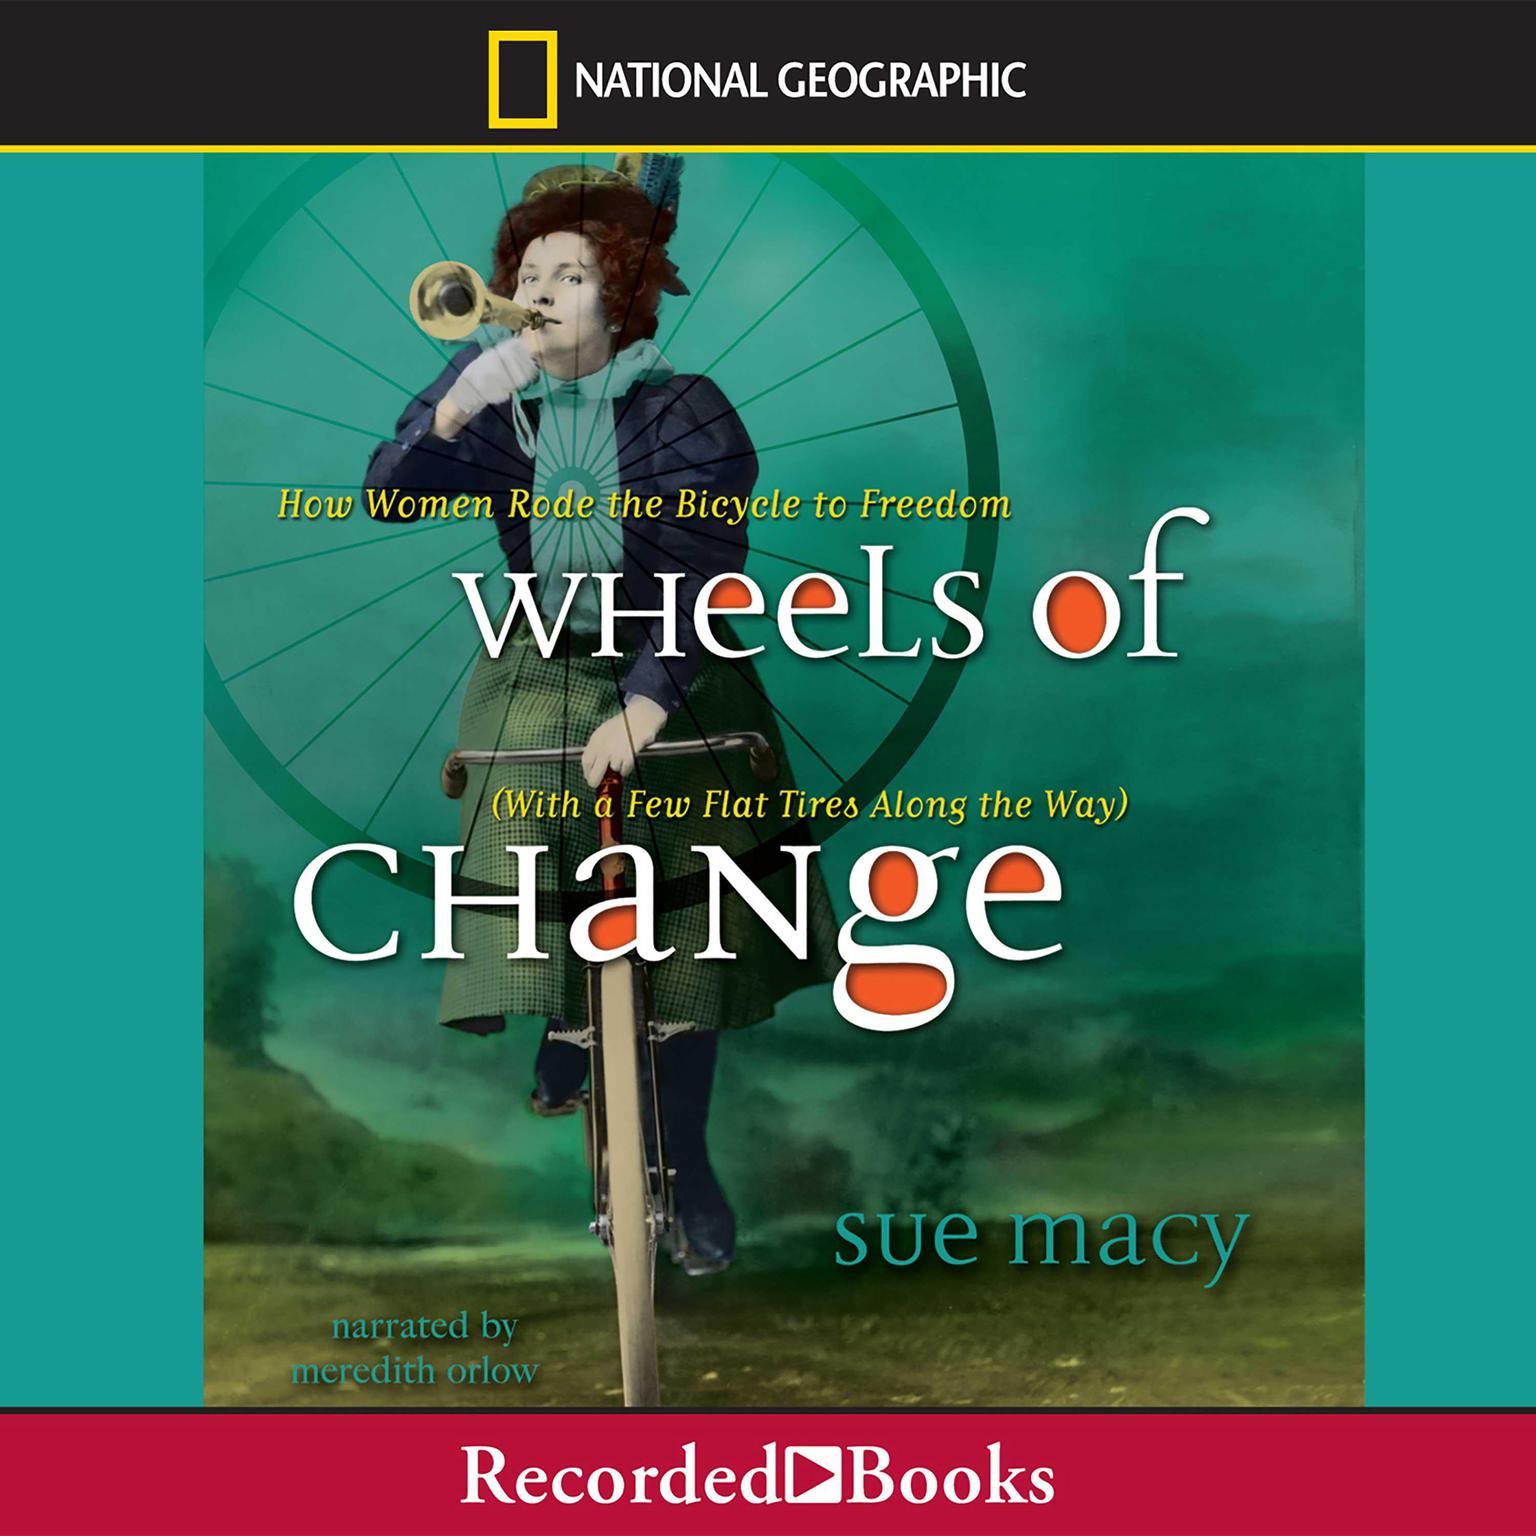 Wheels of Change: How Women Rode the Bicycle to Freedom (with a Few Flat Tires Along the Way) Audiobook, by Sue Macy